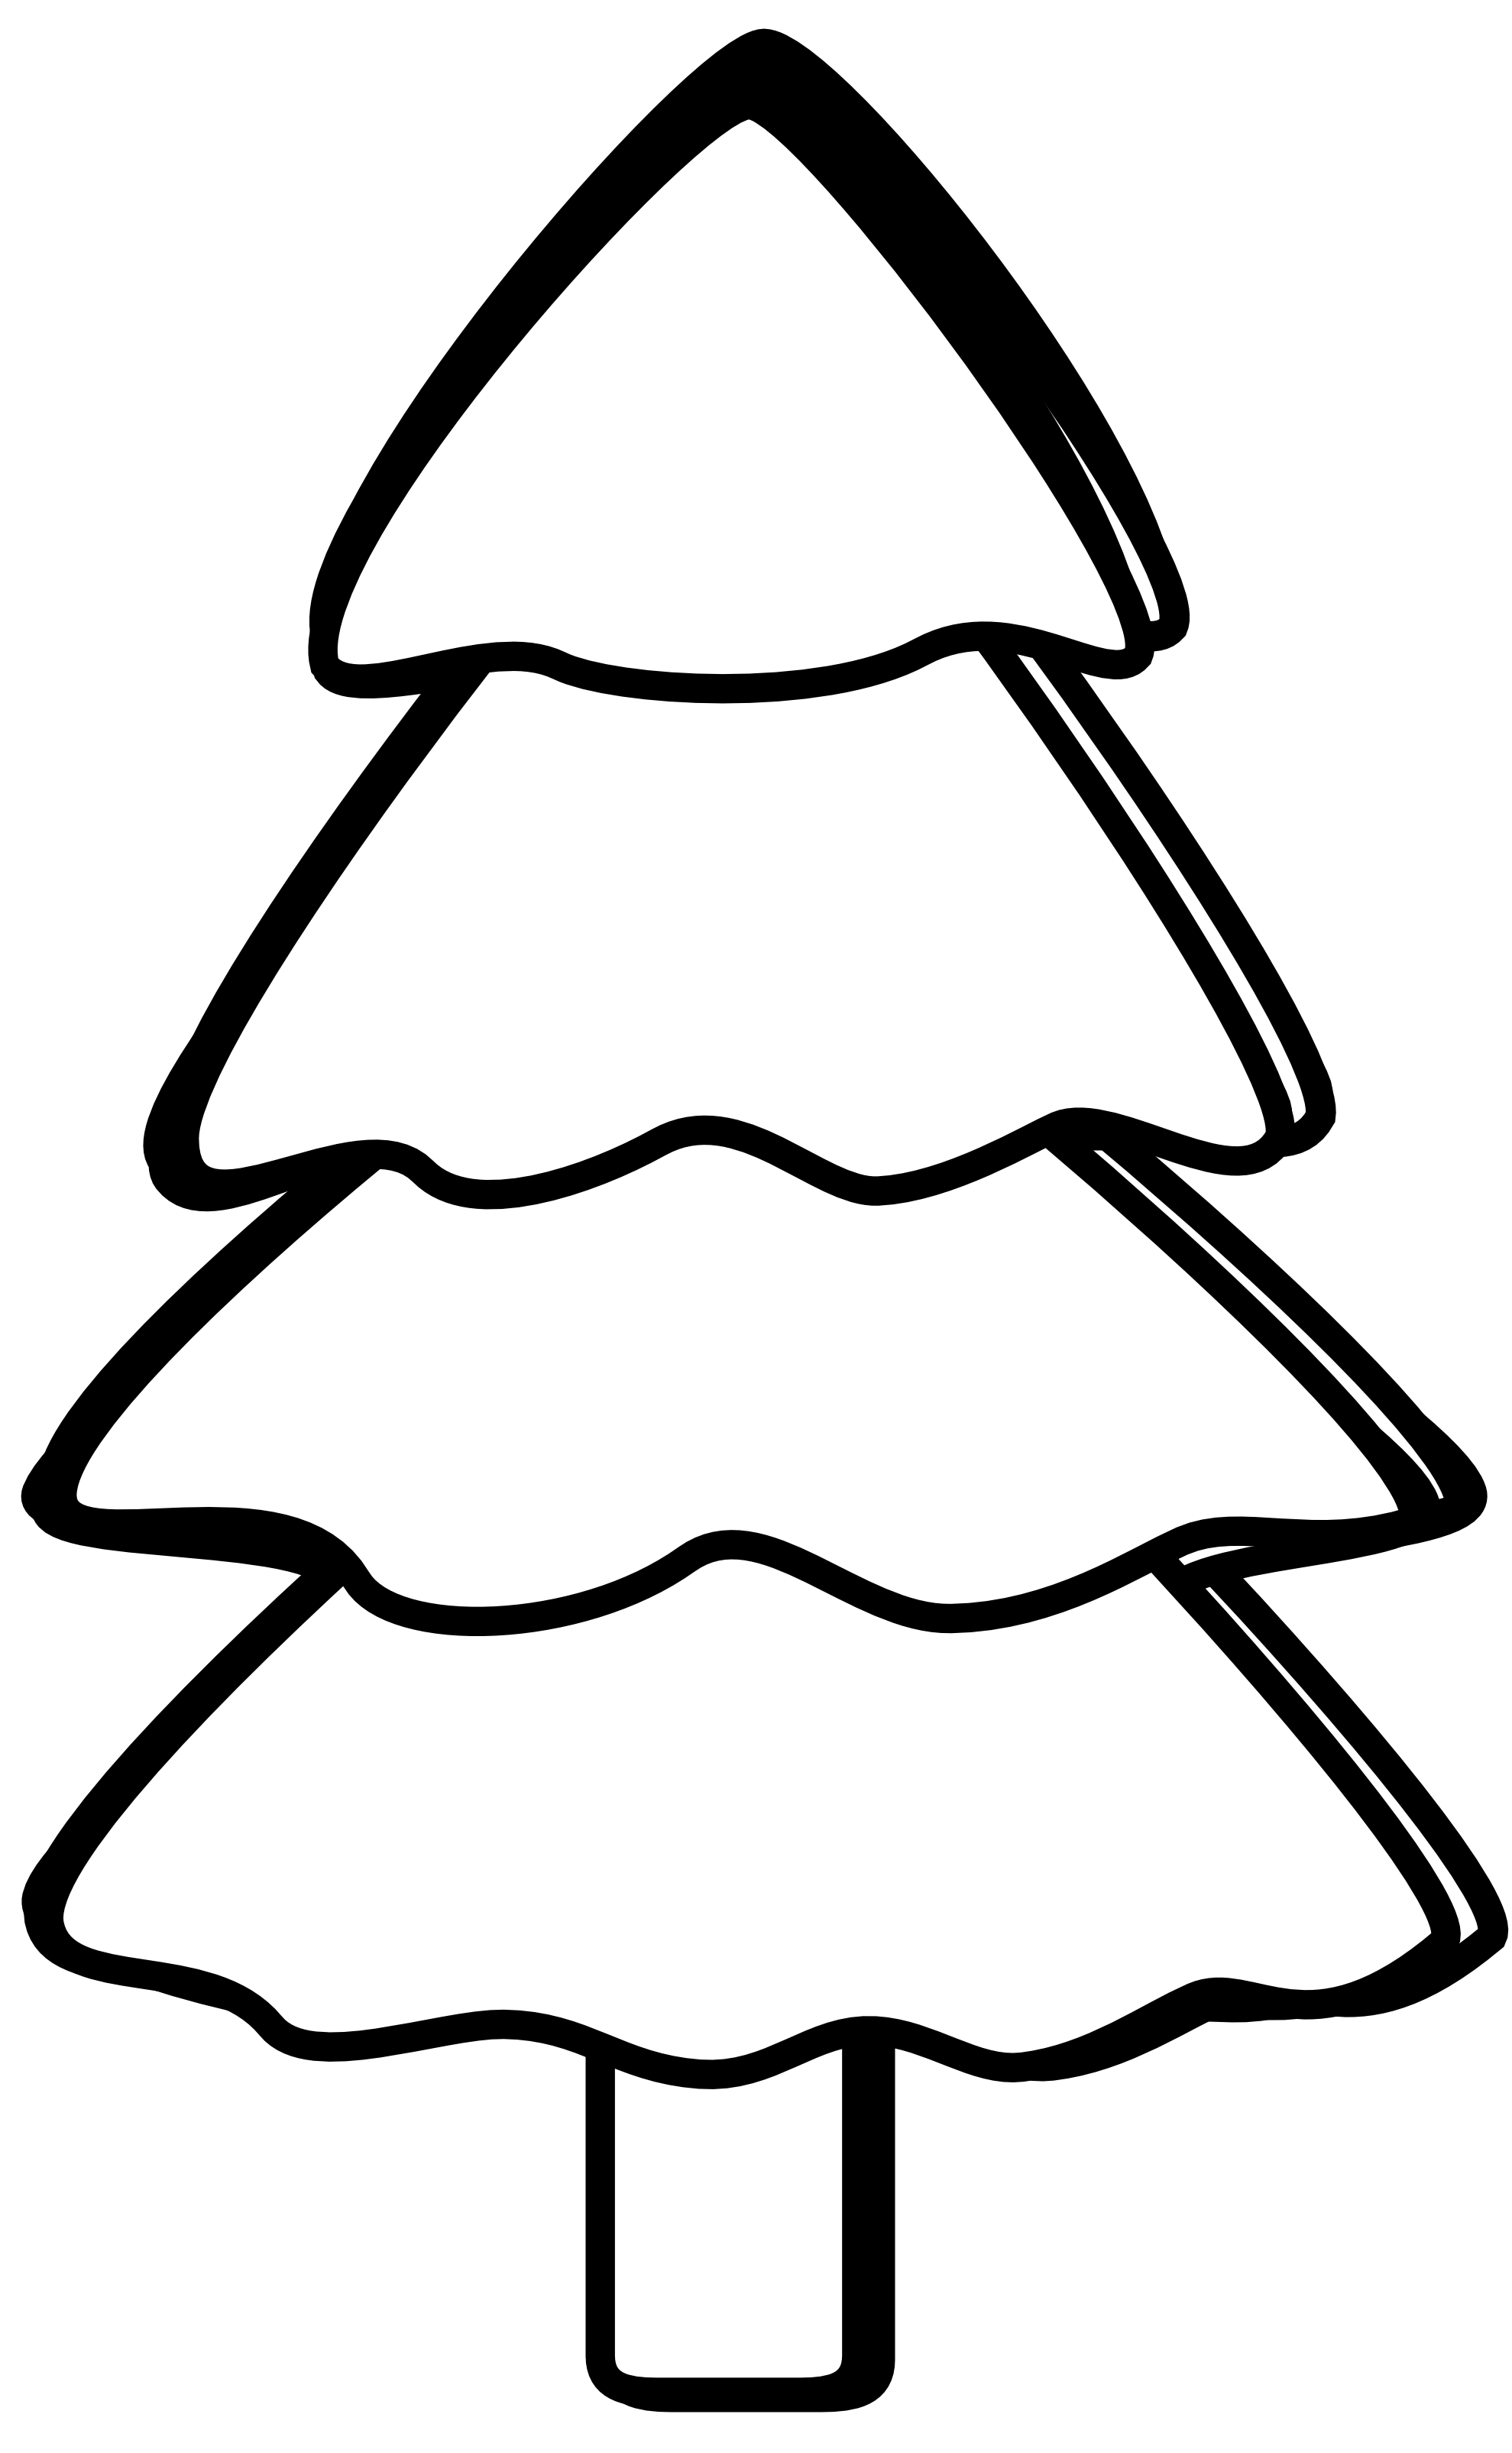 black and white tree clipart - Tree Clip Art Black And White